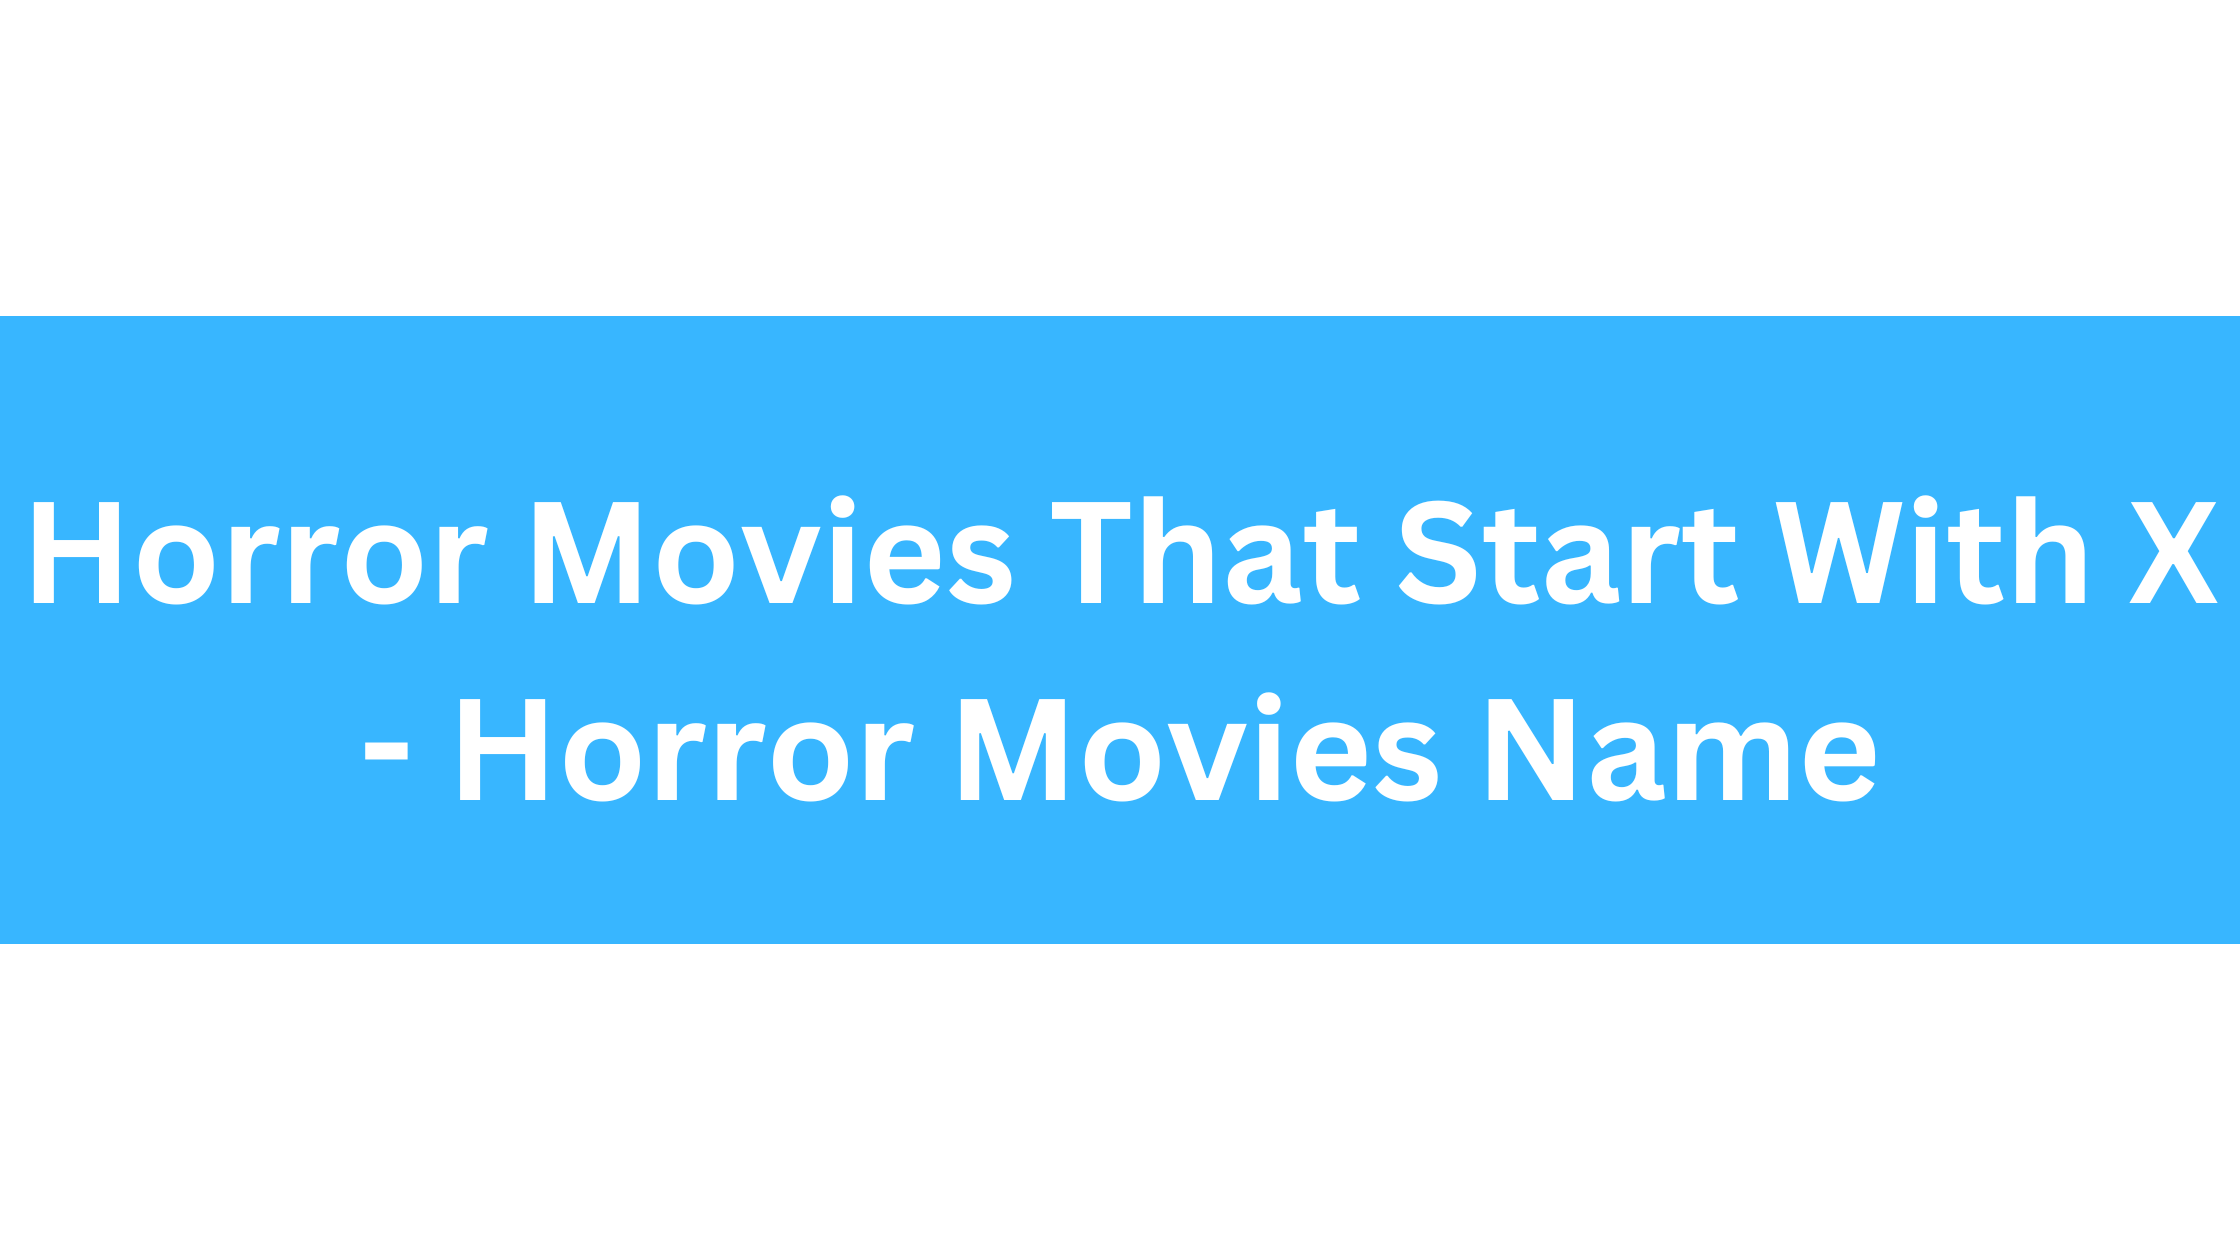 Horror Movies That Start With X